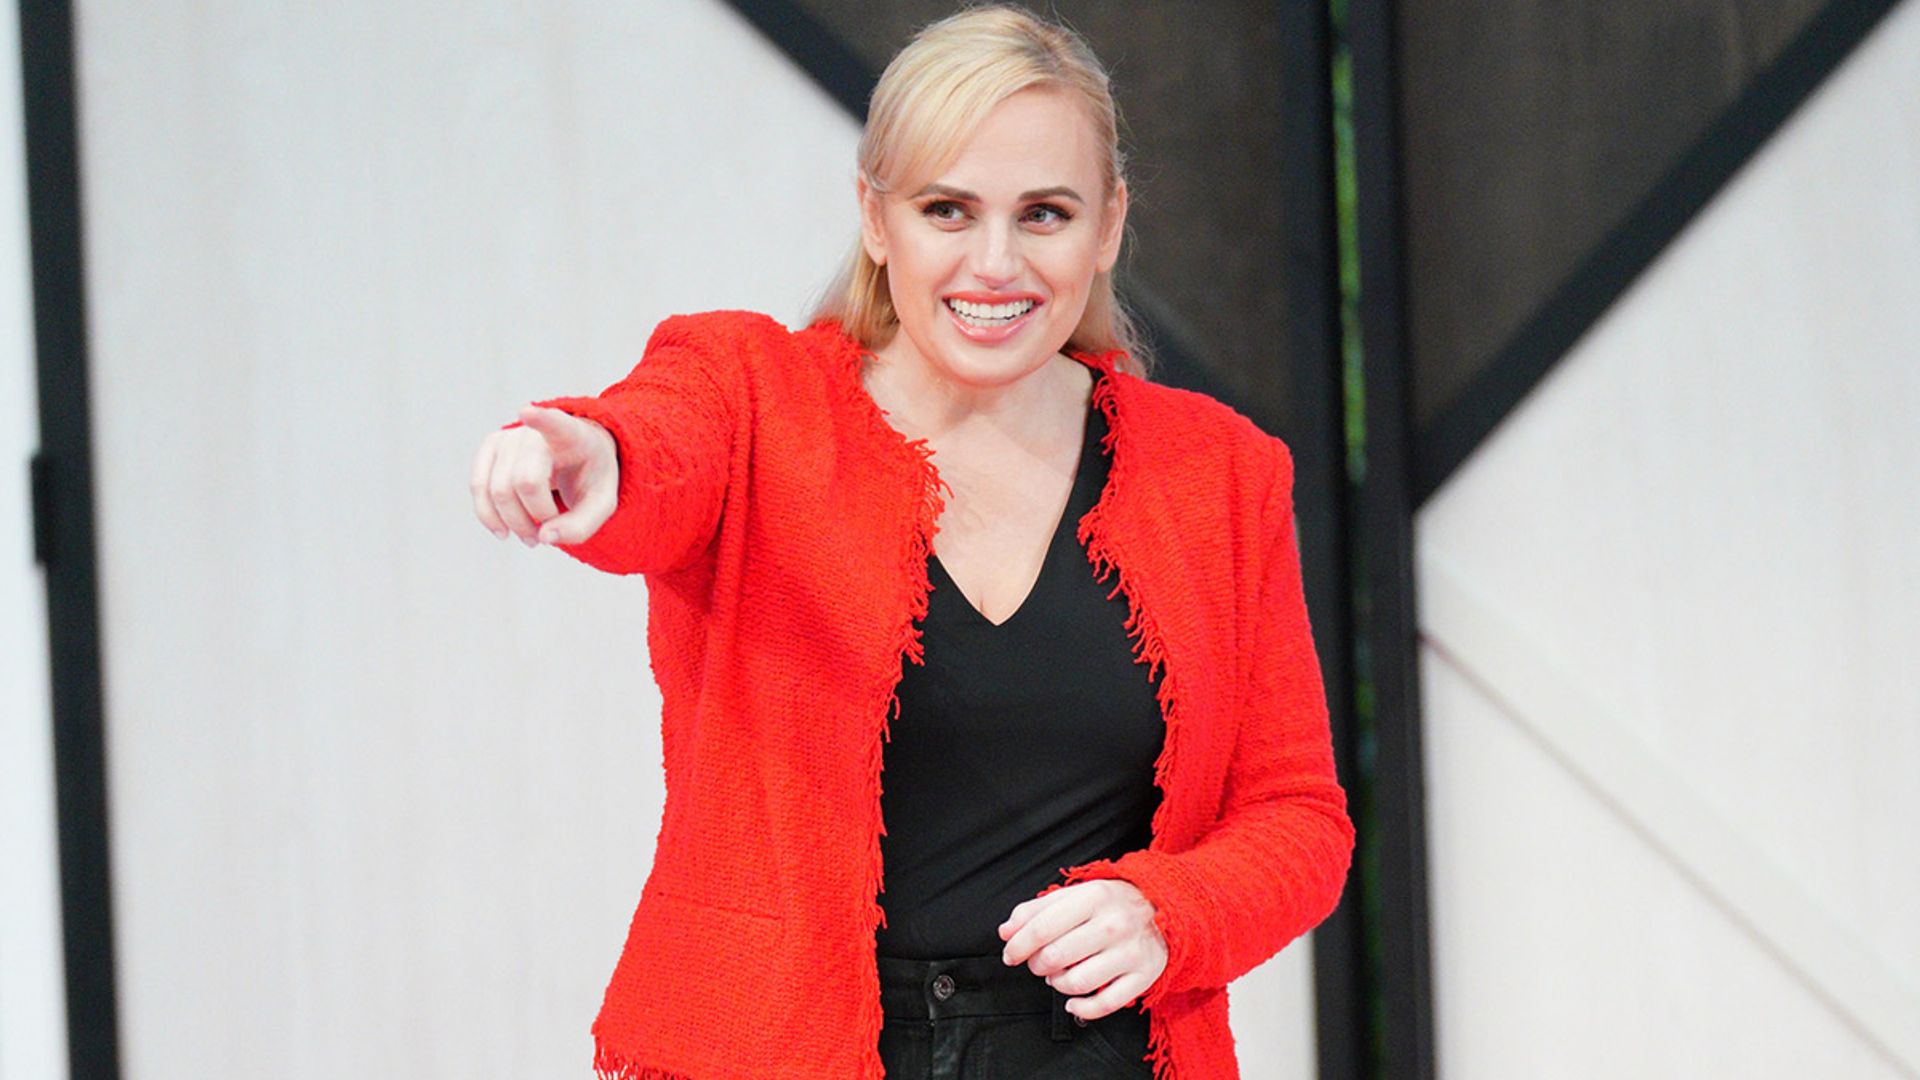 Rebel Wilson oozes confidence in bold look for new video - fans react ...